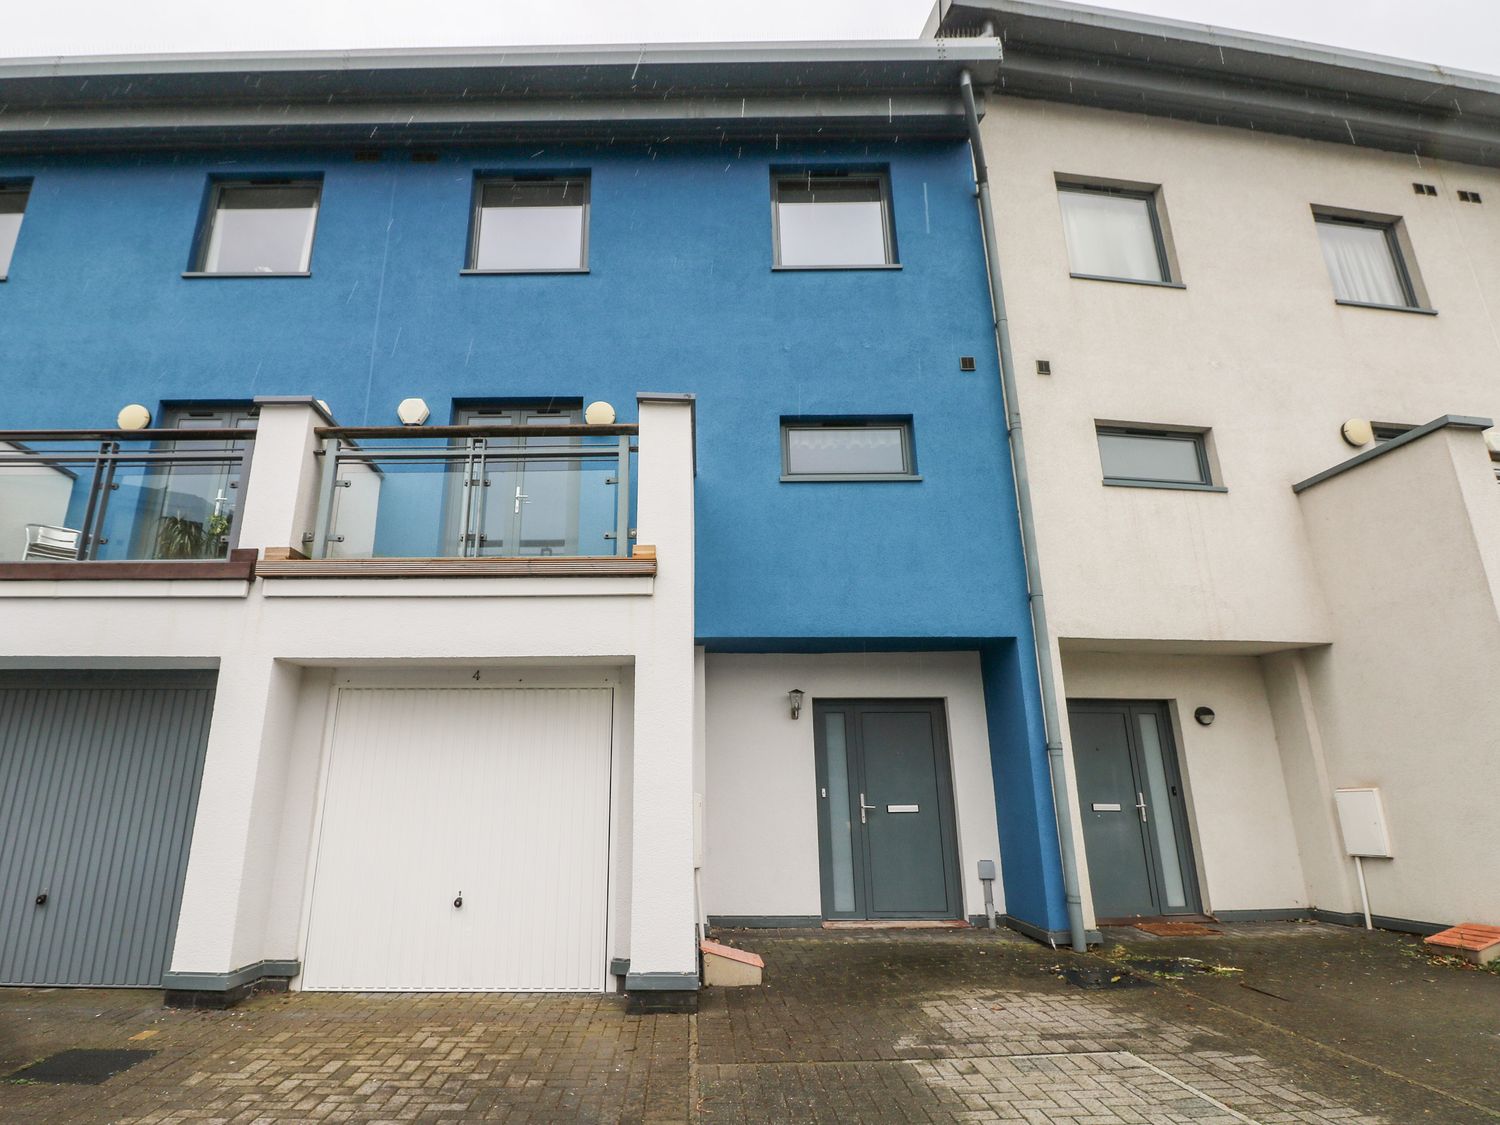 4 St.Stephens Court - South Wales - 1063068 - photo 1